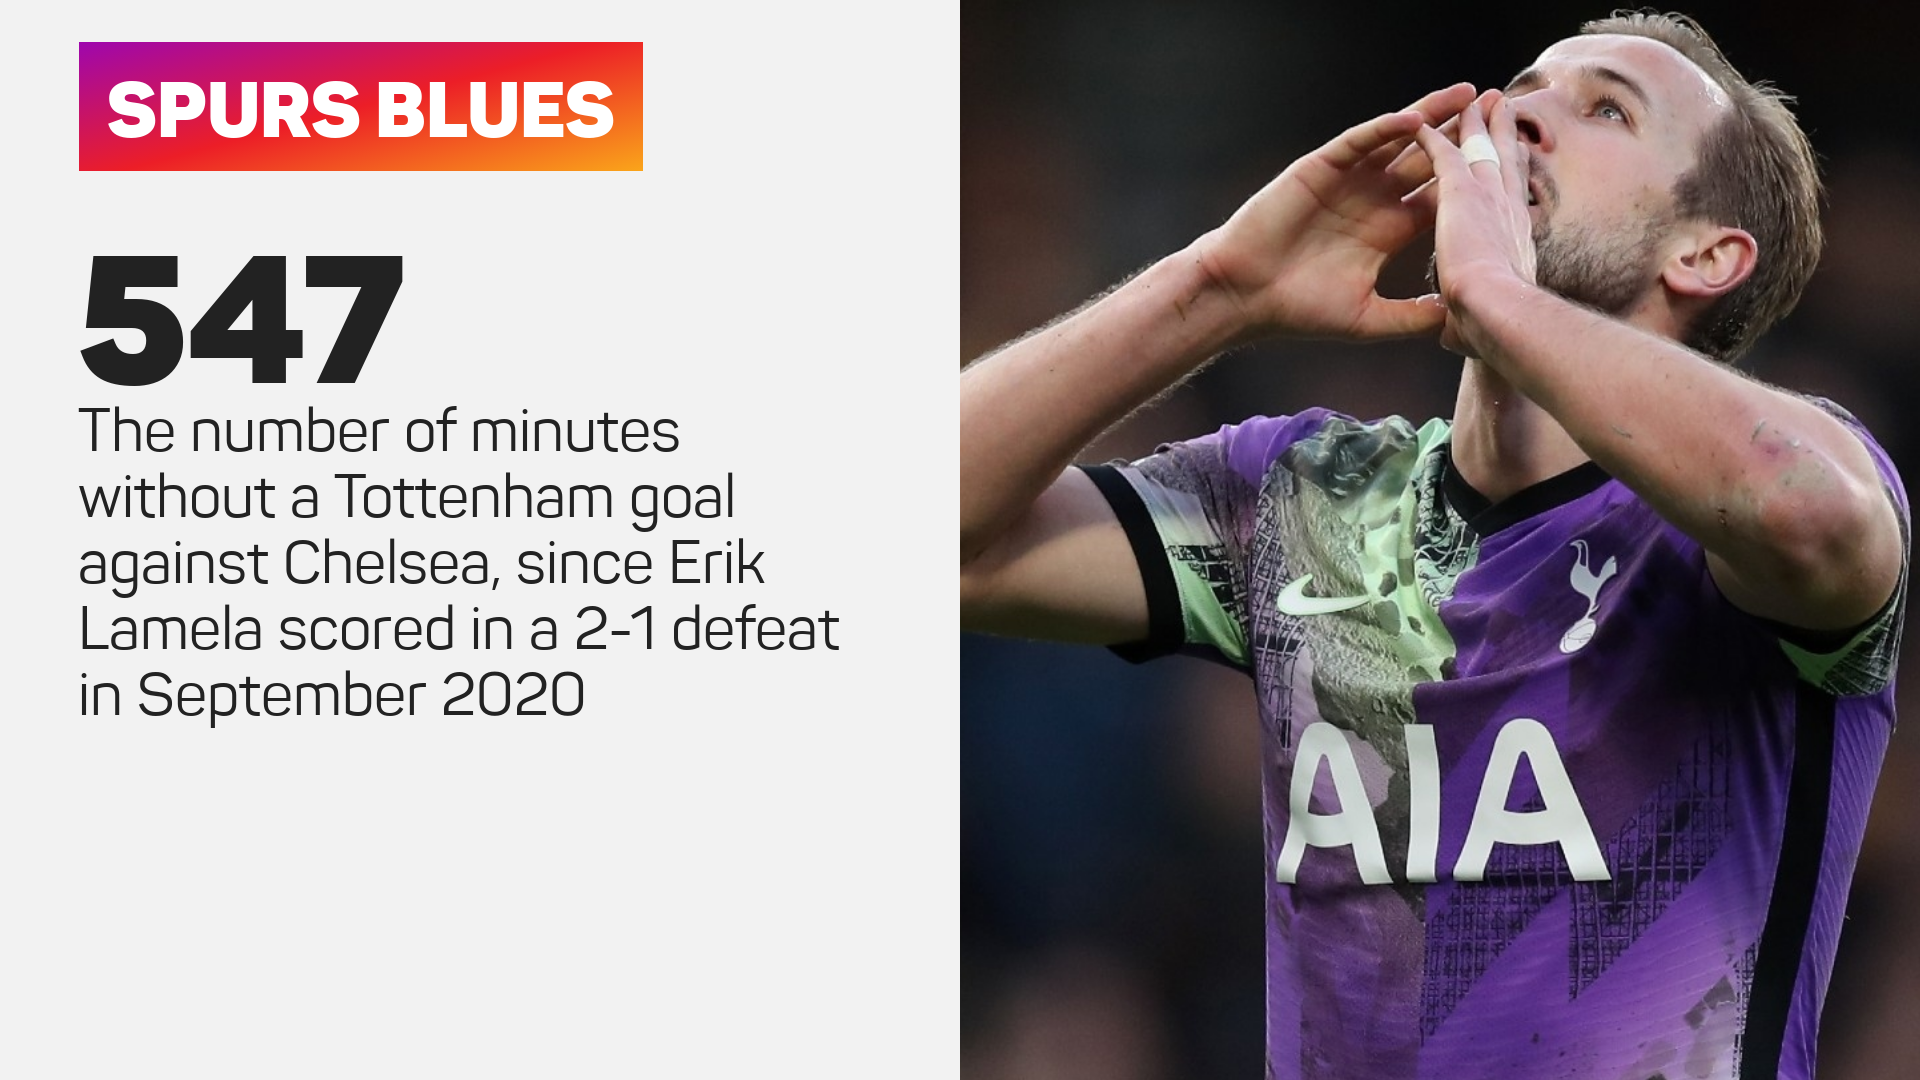 Tottenham have gone 547 minutes without a goal against Chelsea